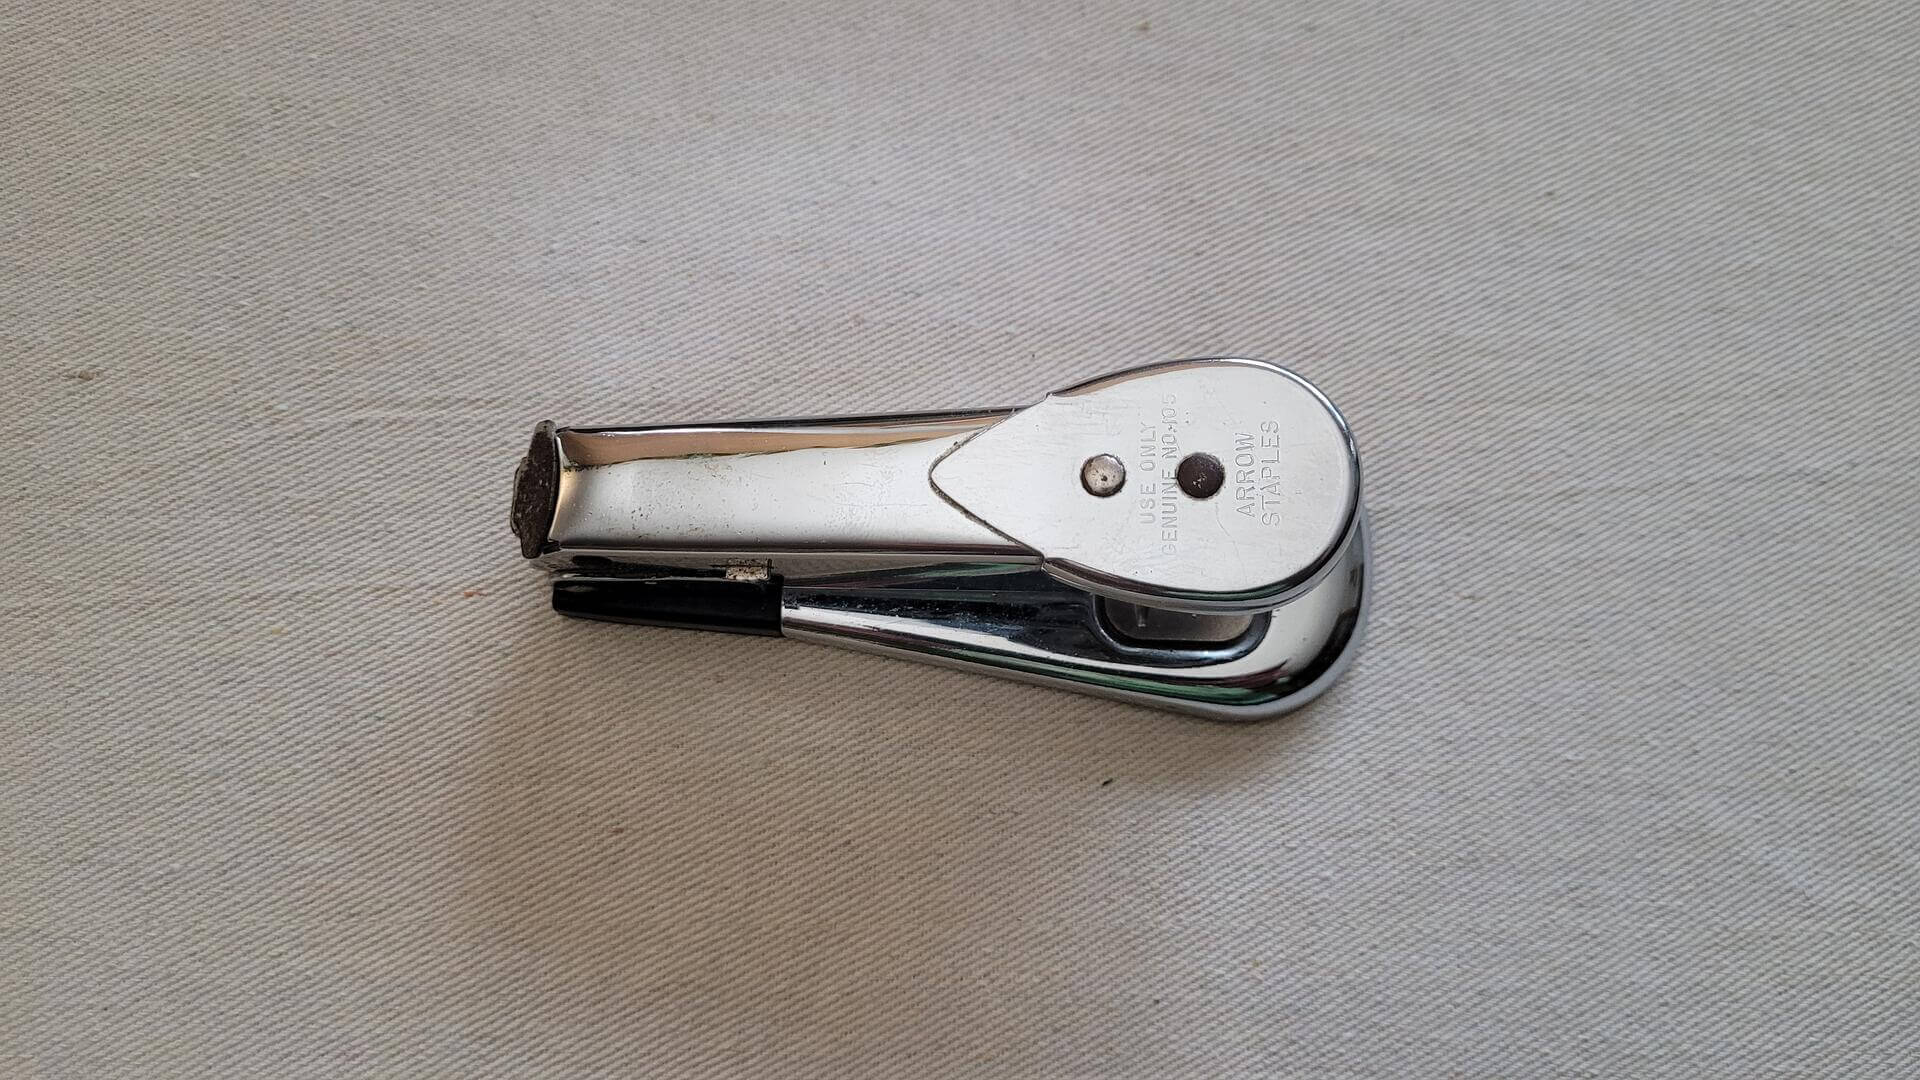 1940s chrome finish Arrow Fastener Co Stapler #105 Pat 2205709 2312142 Brooklyn NY. Retro MCM design vintage made in USA collectible stationary and office equipment